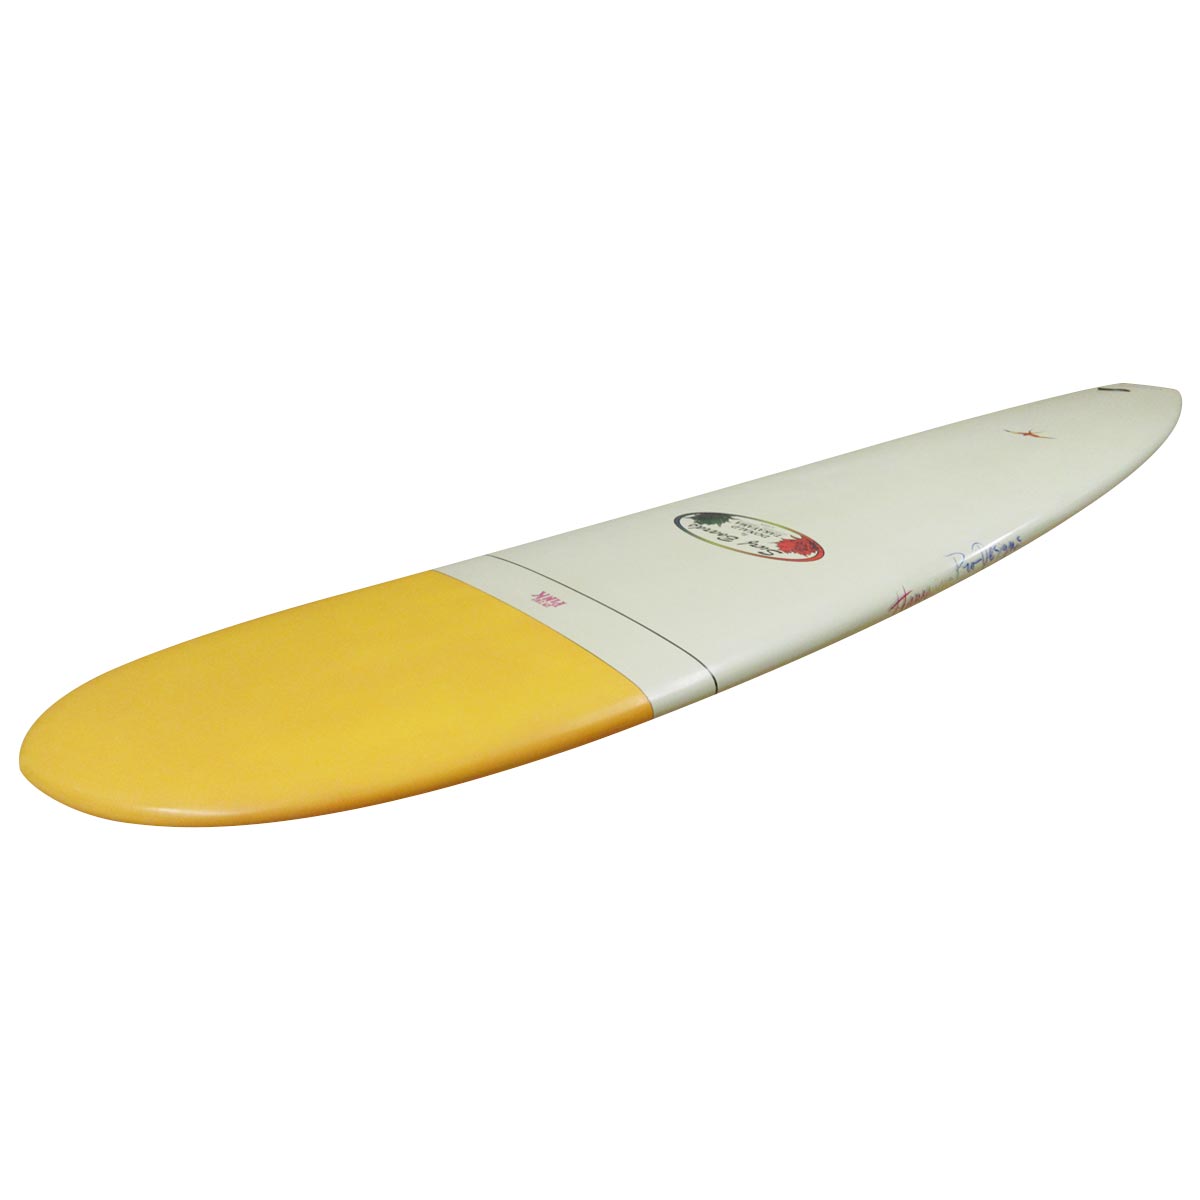 HAWAIIAN PRO DESIGNS / IN THE PINK 9`2 SURFTECH